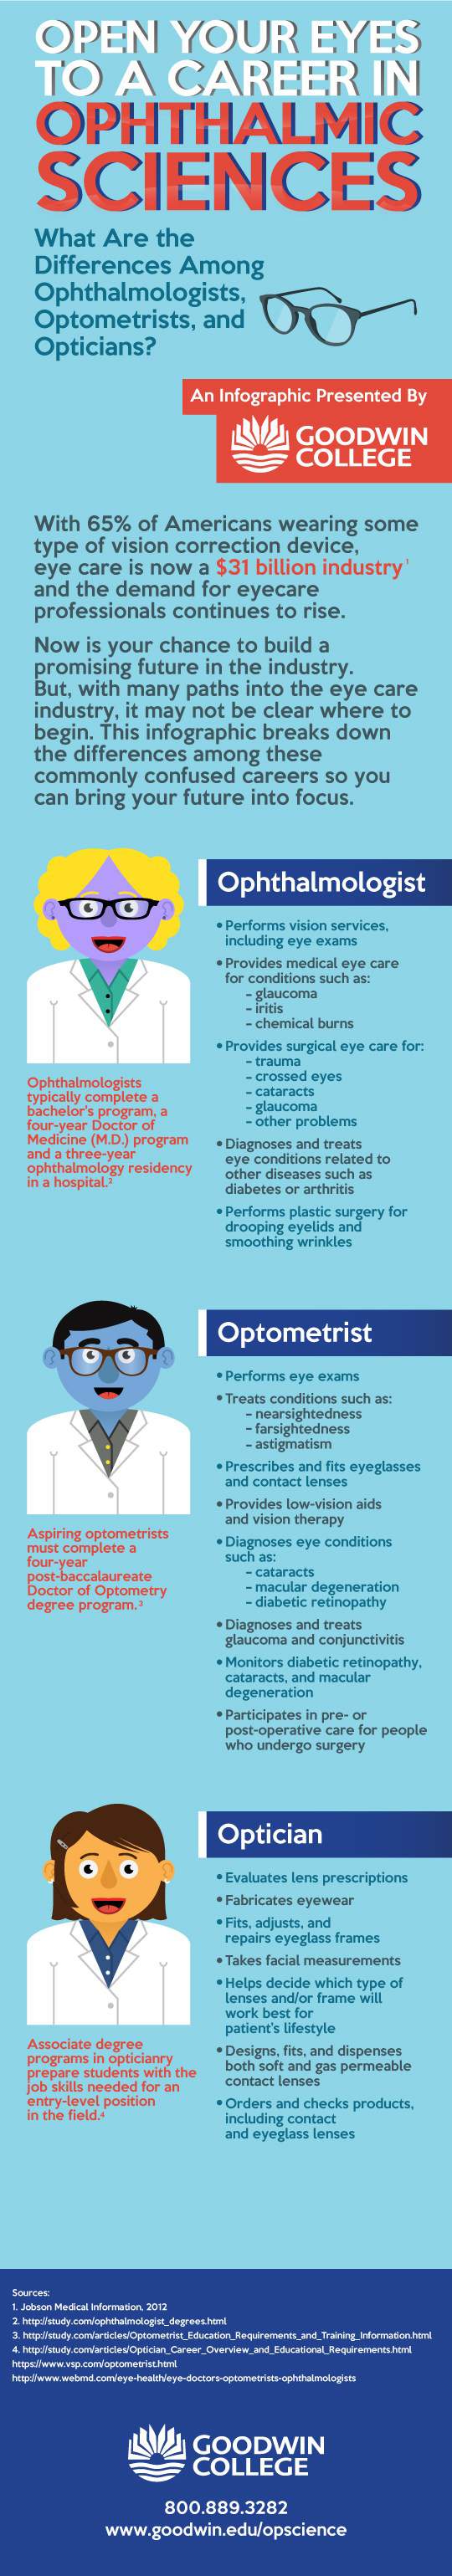 Career in Ophthalmic Science